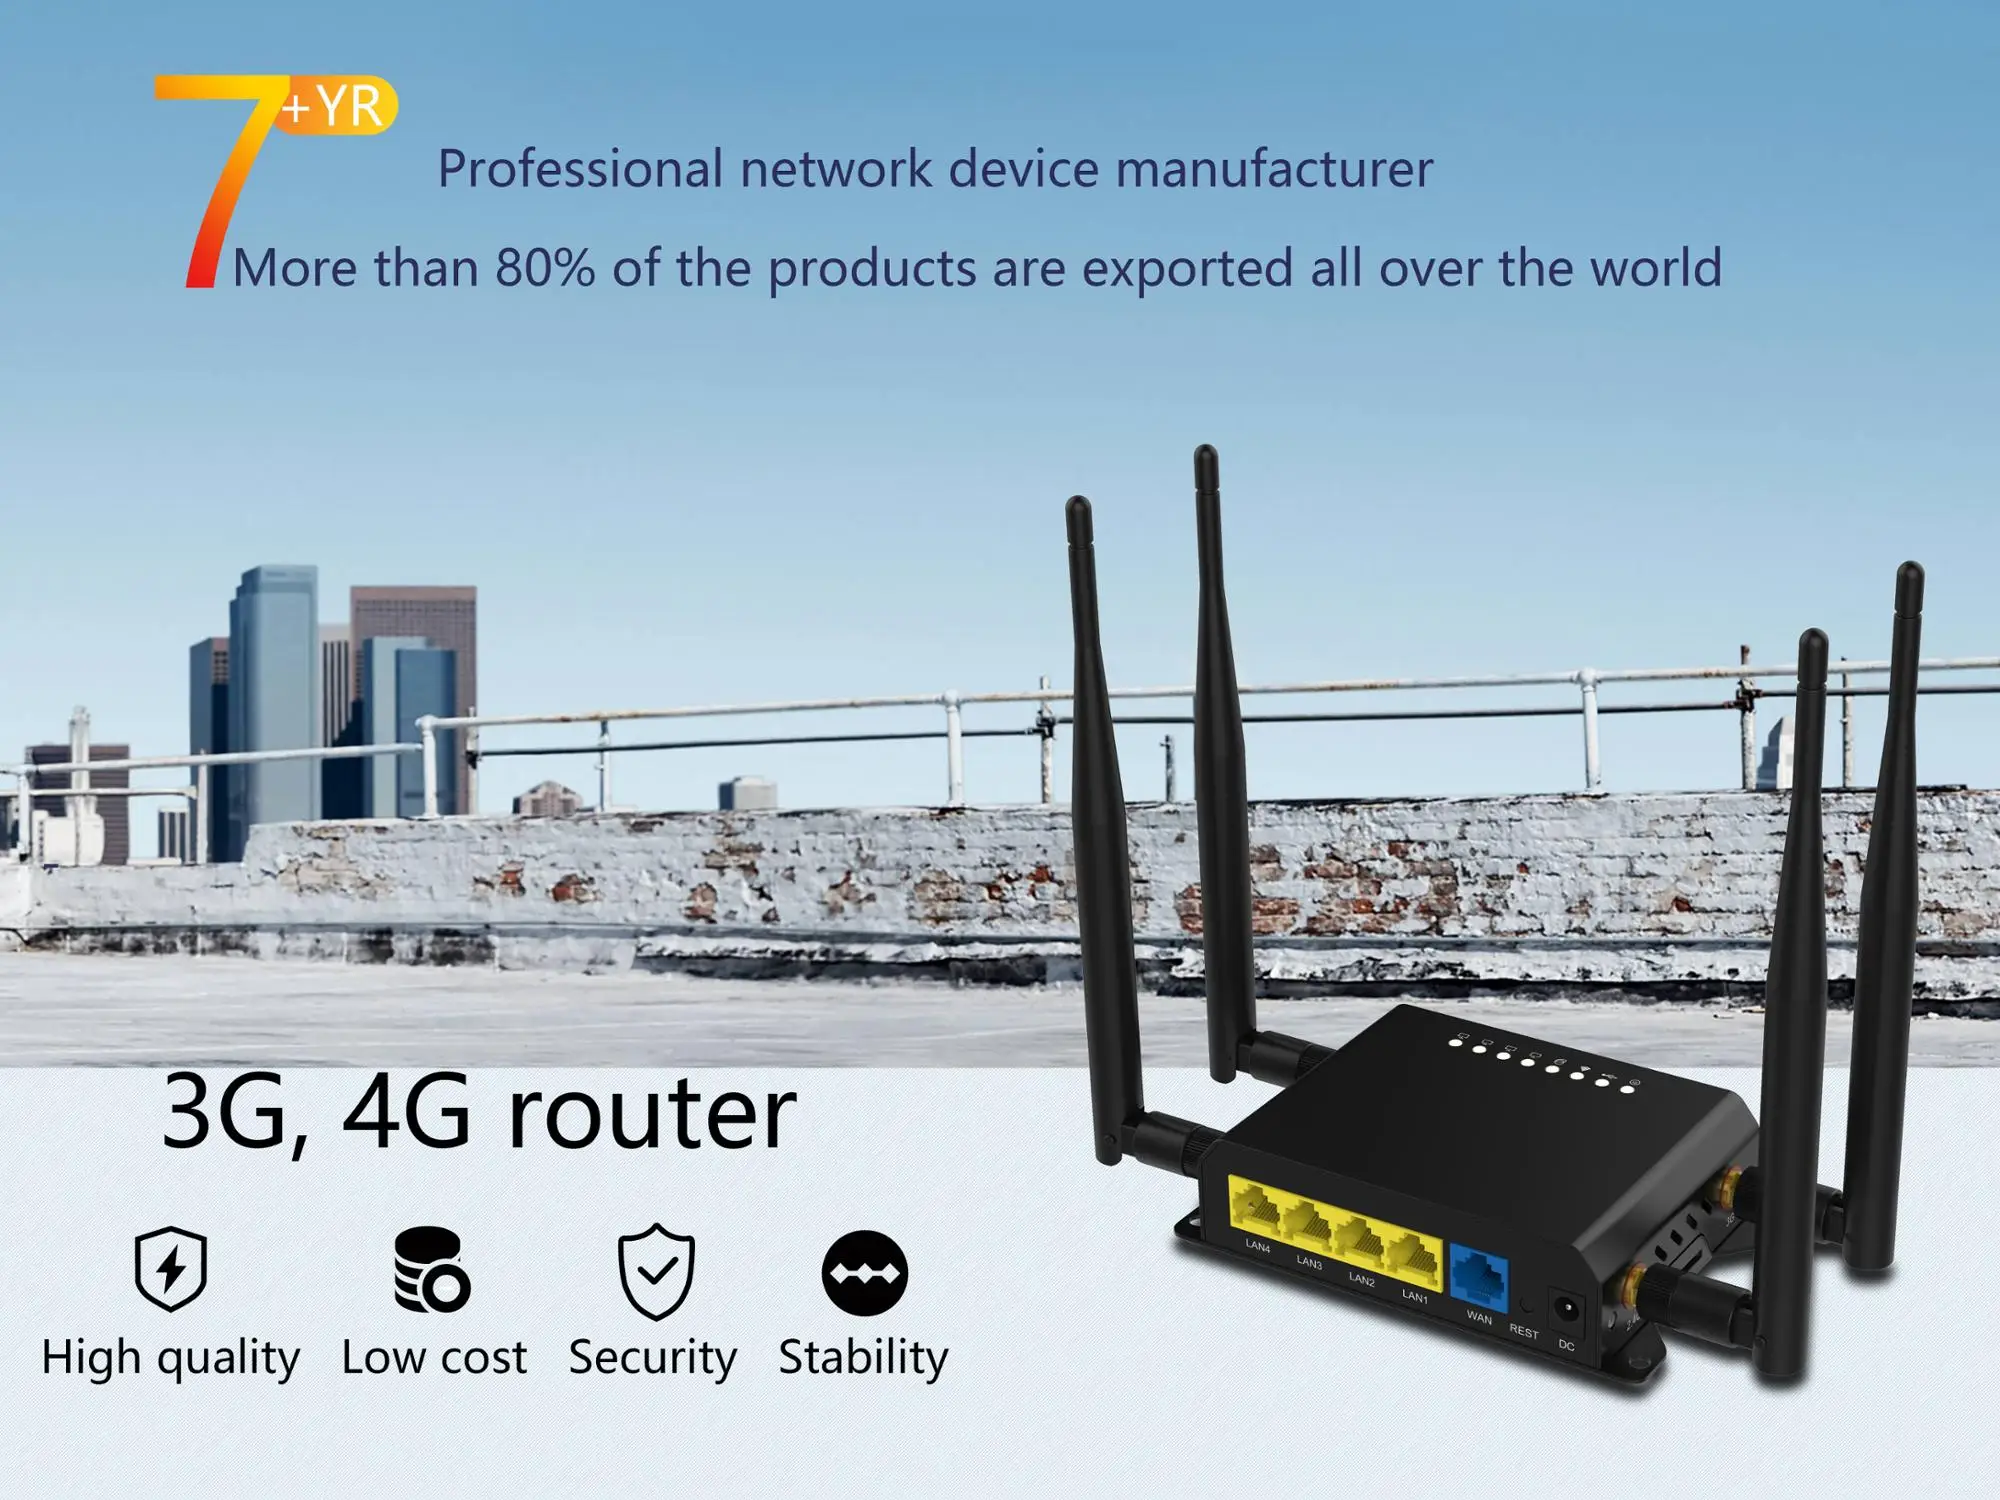 4g sim card band 28 lte 192.168.8.1 modem wifi router 300mbps